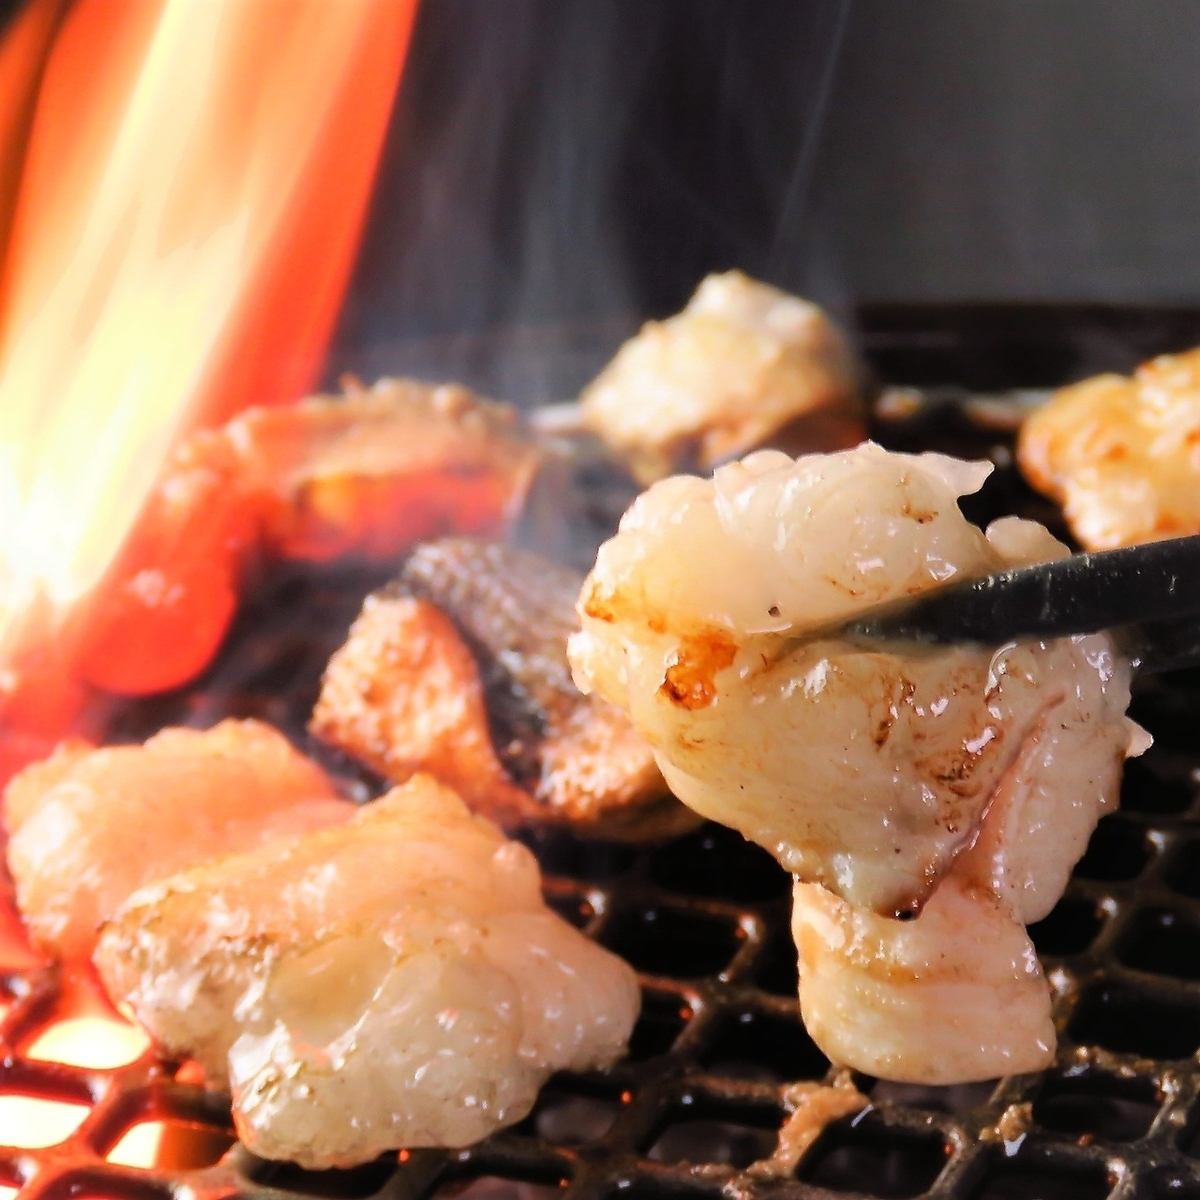 How about some delicious yakiniku at a beautiful and delicious yakiniku restaurant in Gaienmae?